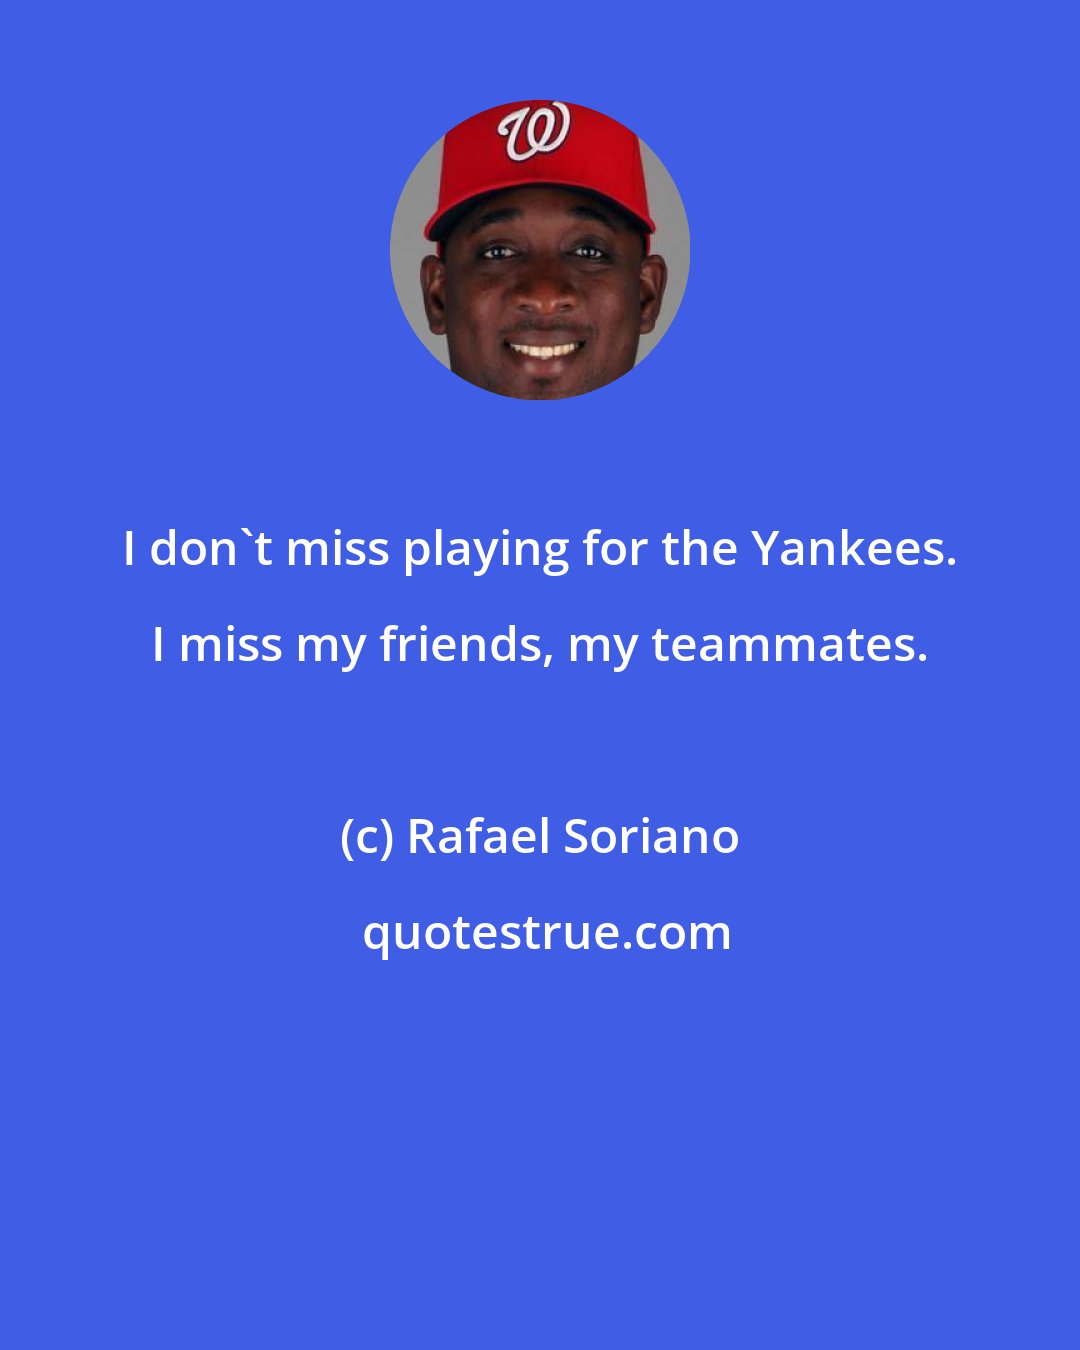 Rafael Soriano: I don't miss playing for the Yankees. I miss my friends, my teammates.